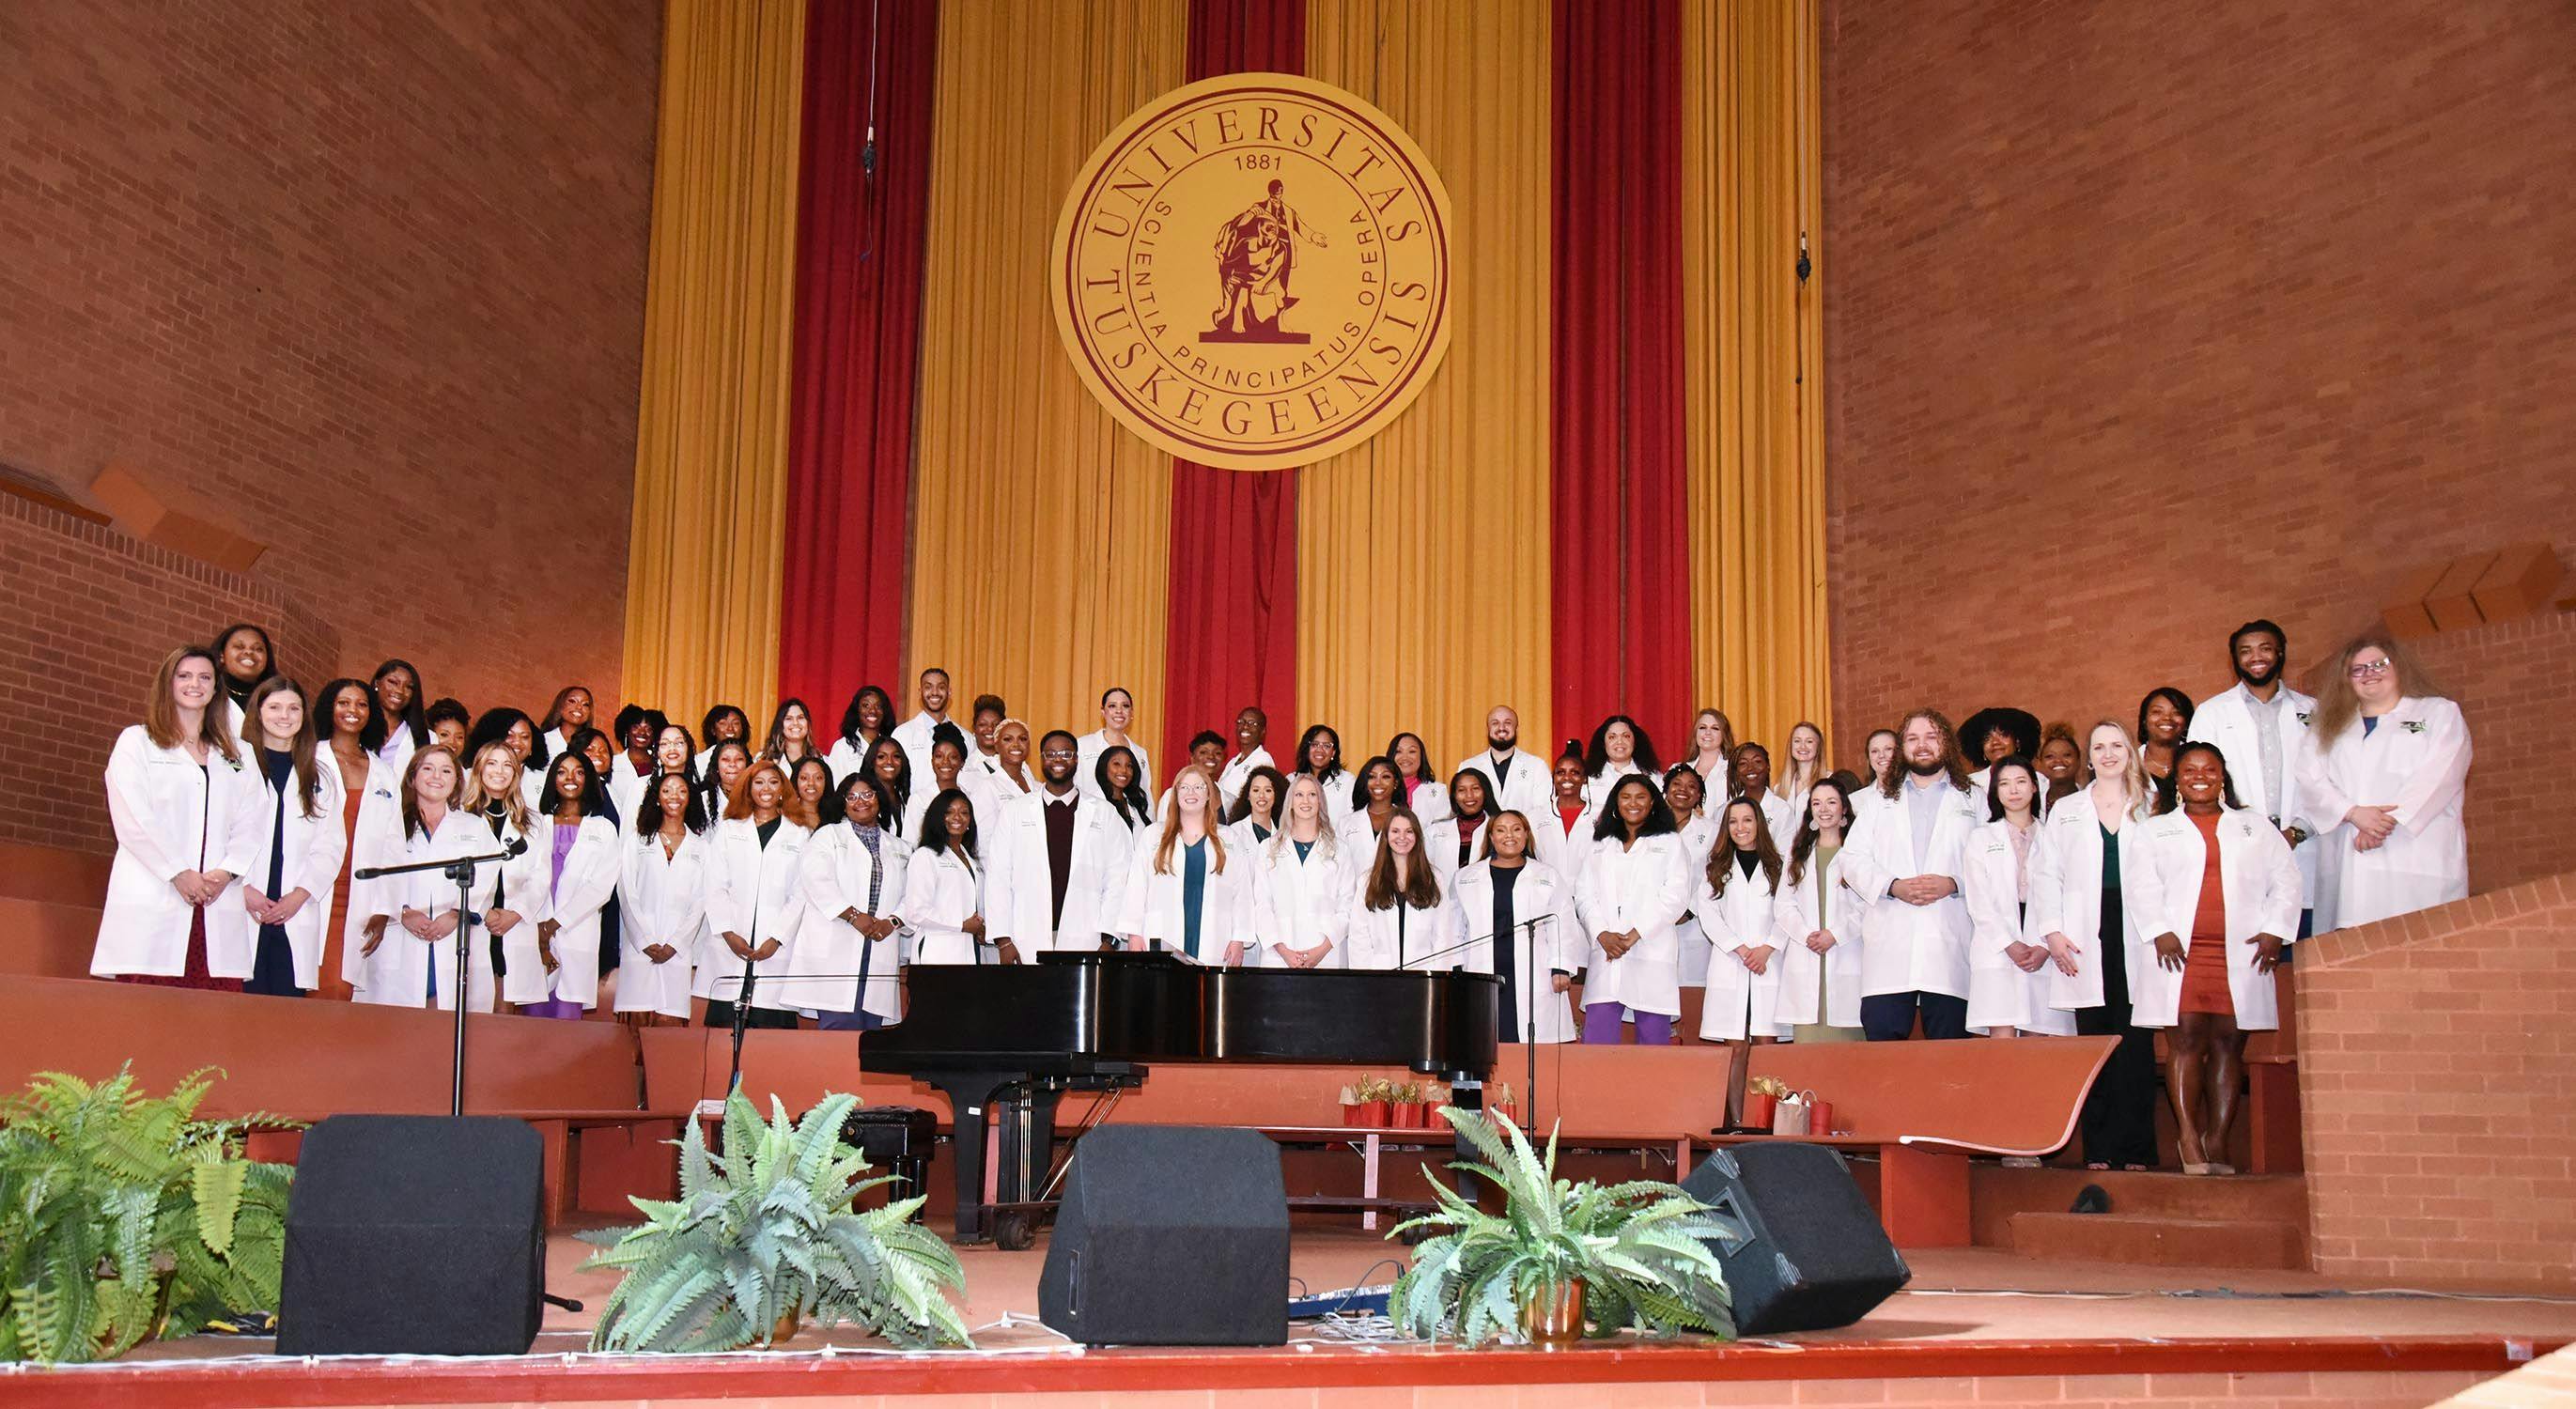 Class of 2024 presented at White Coat Ceremony. (Photo courtesy of TUCVM)